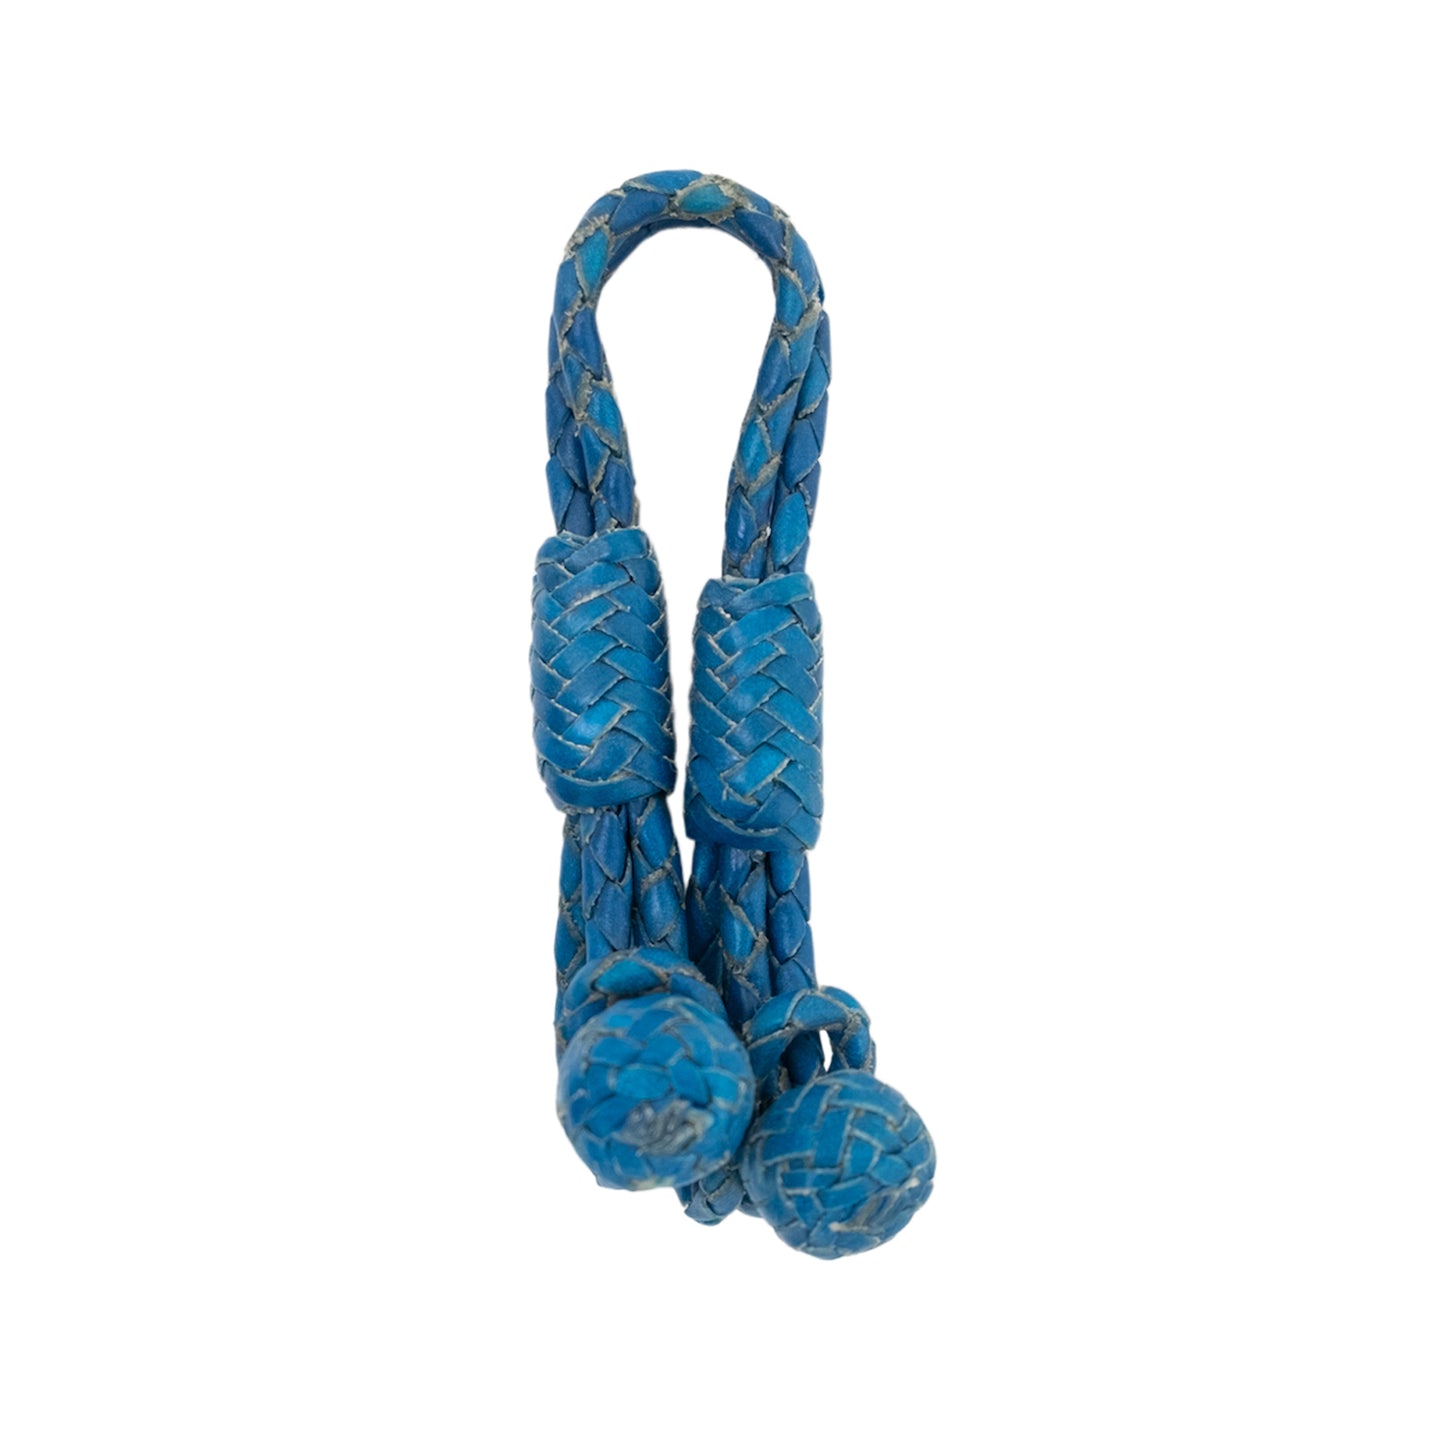 Tie down holder turquoise rawhide braided.